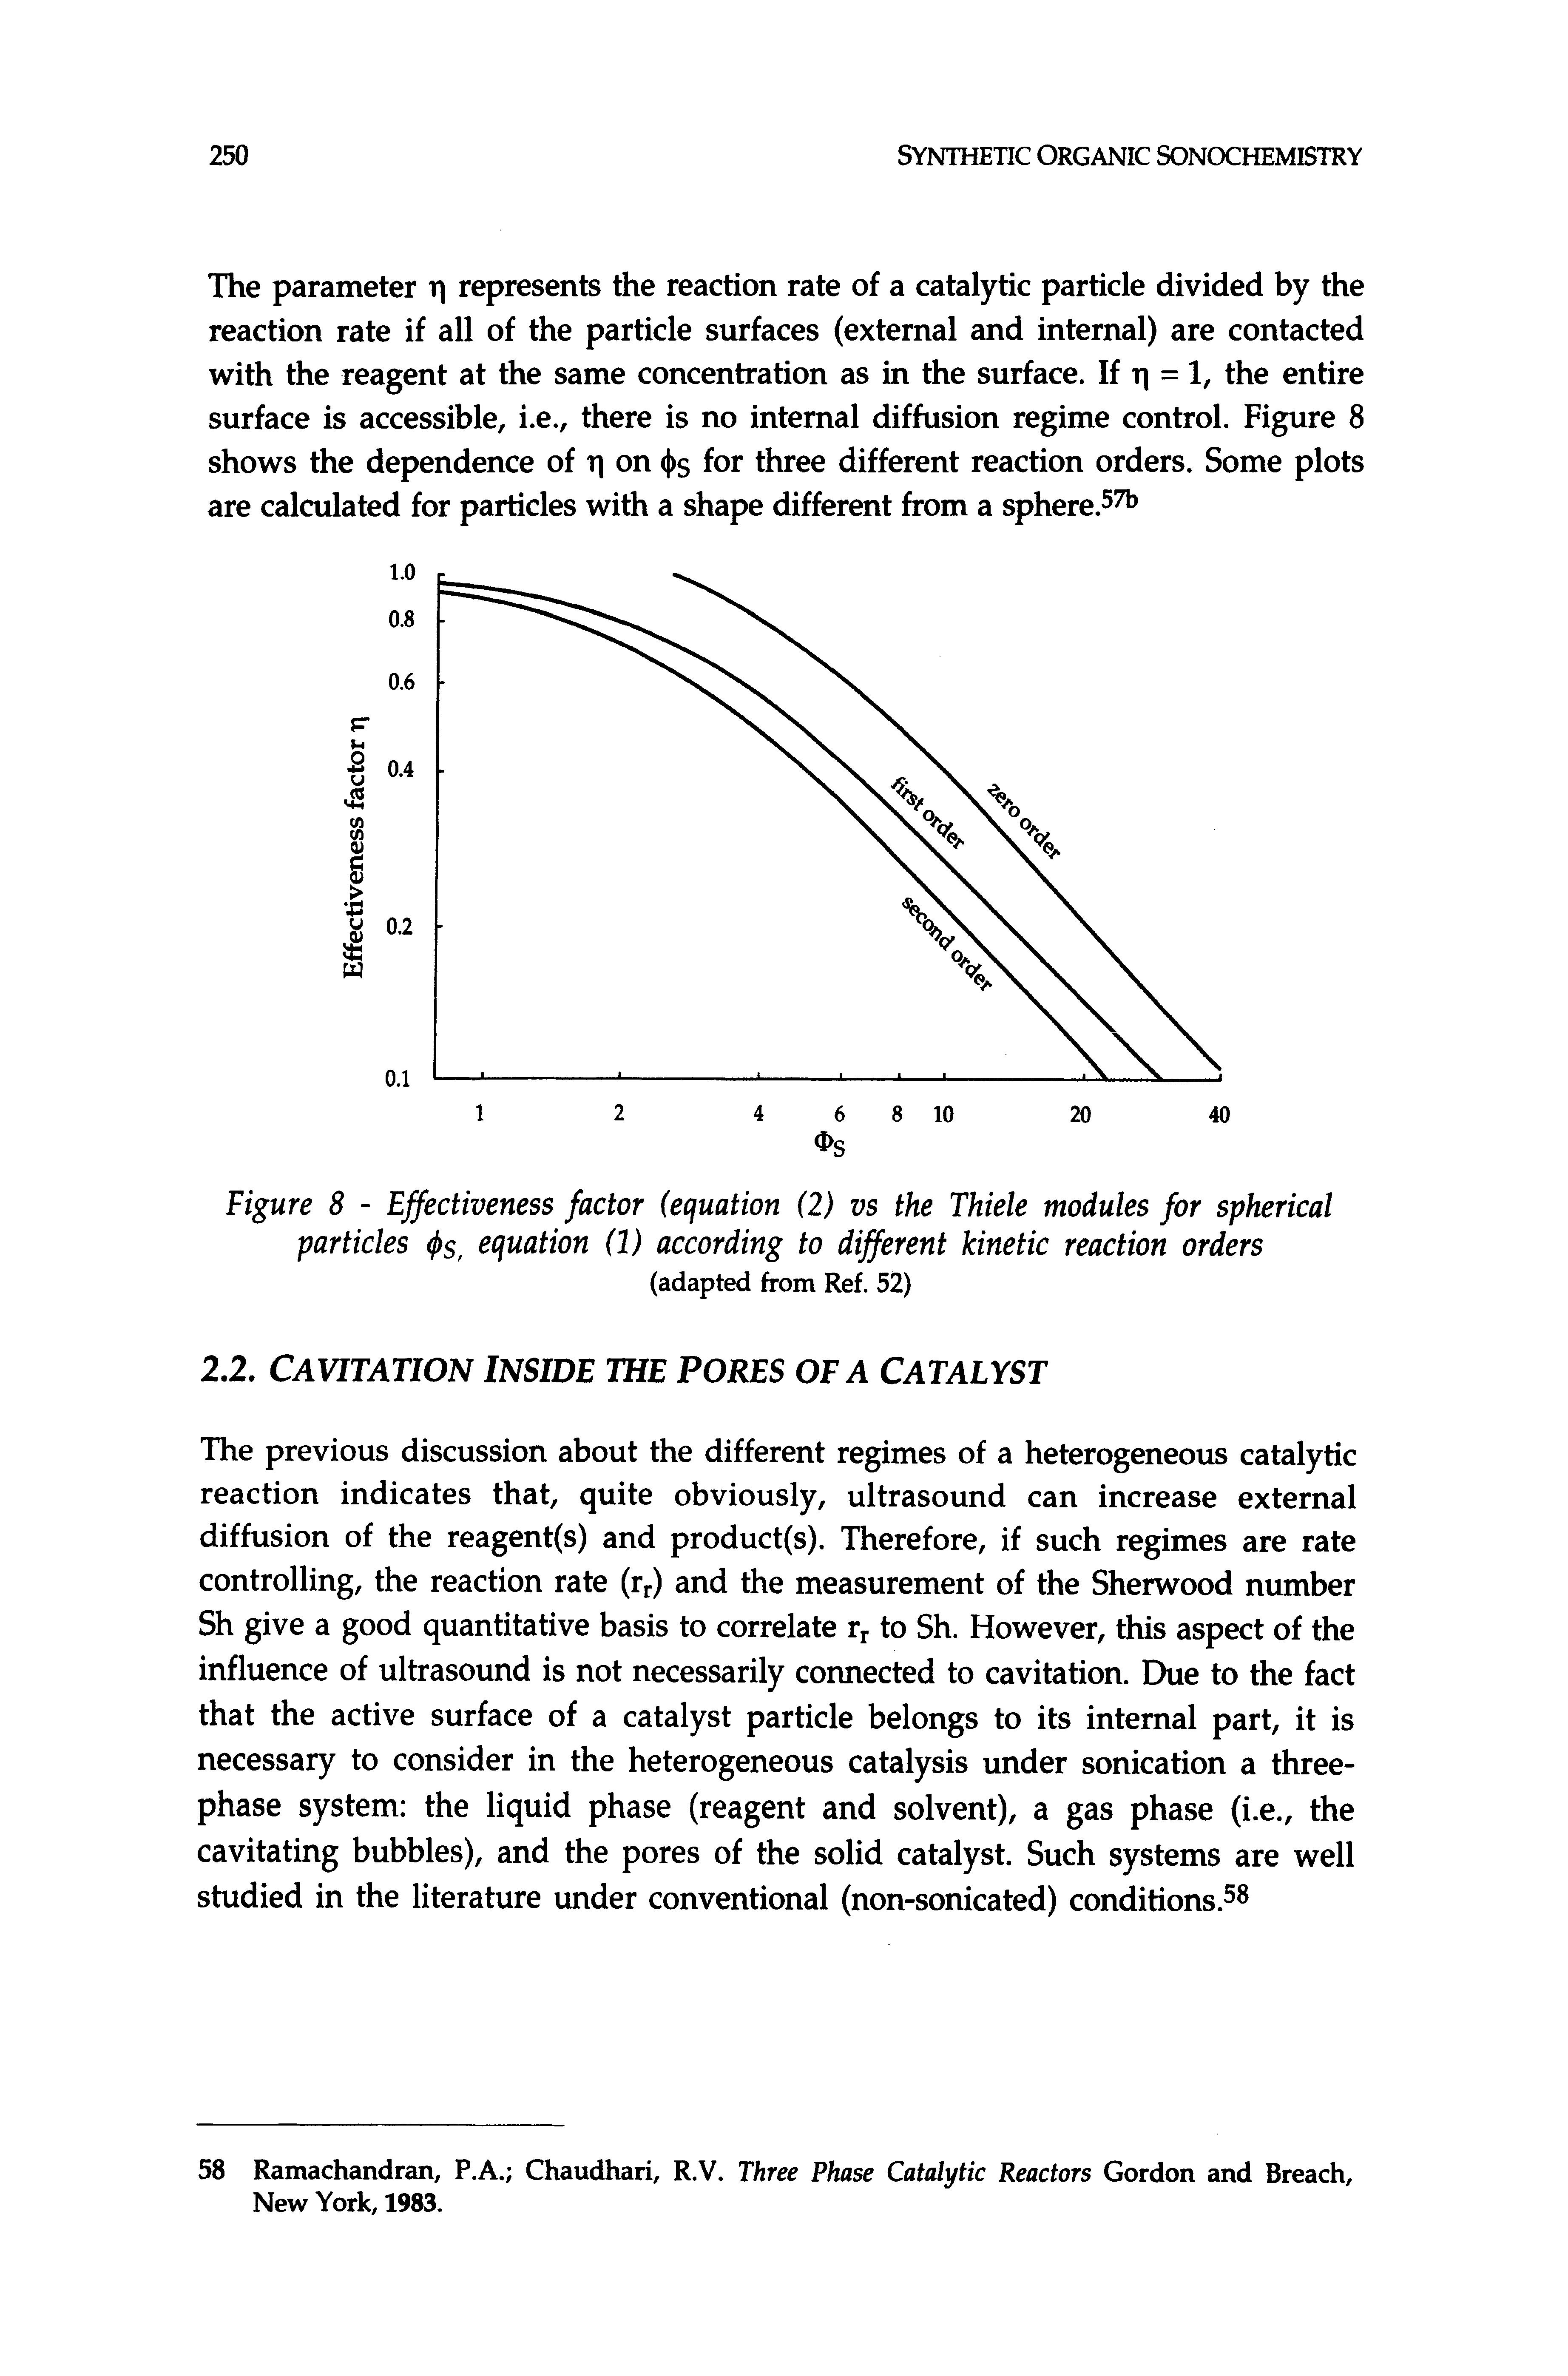 Figure 8 - Effectiveness factor (equation (2) vs the Thiele modules for spherical particles equation (1) according to different kinetic reaction orders (adapted from Ref. 52)...